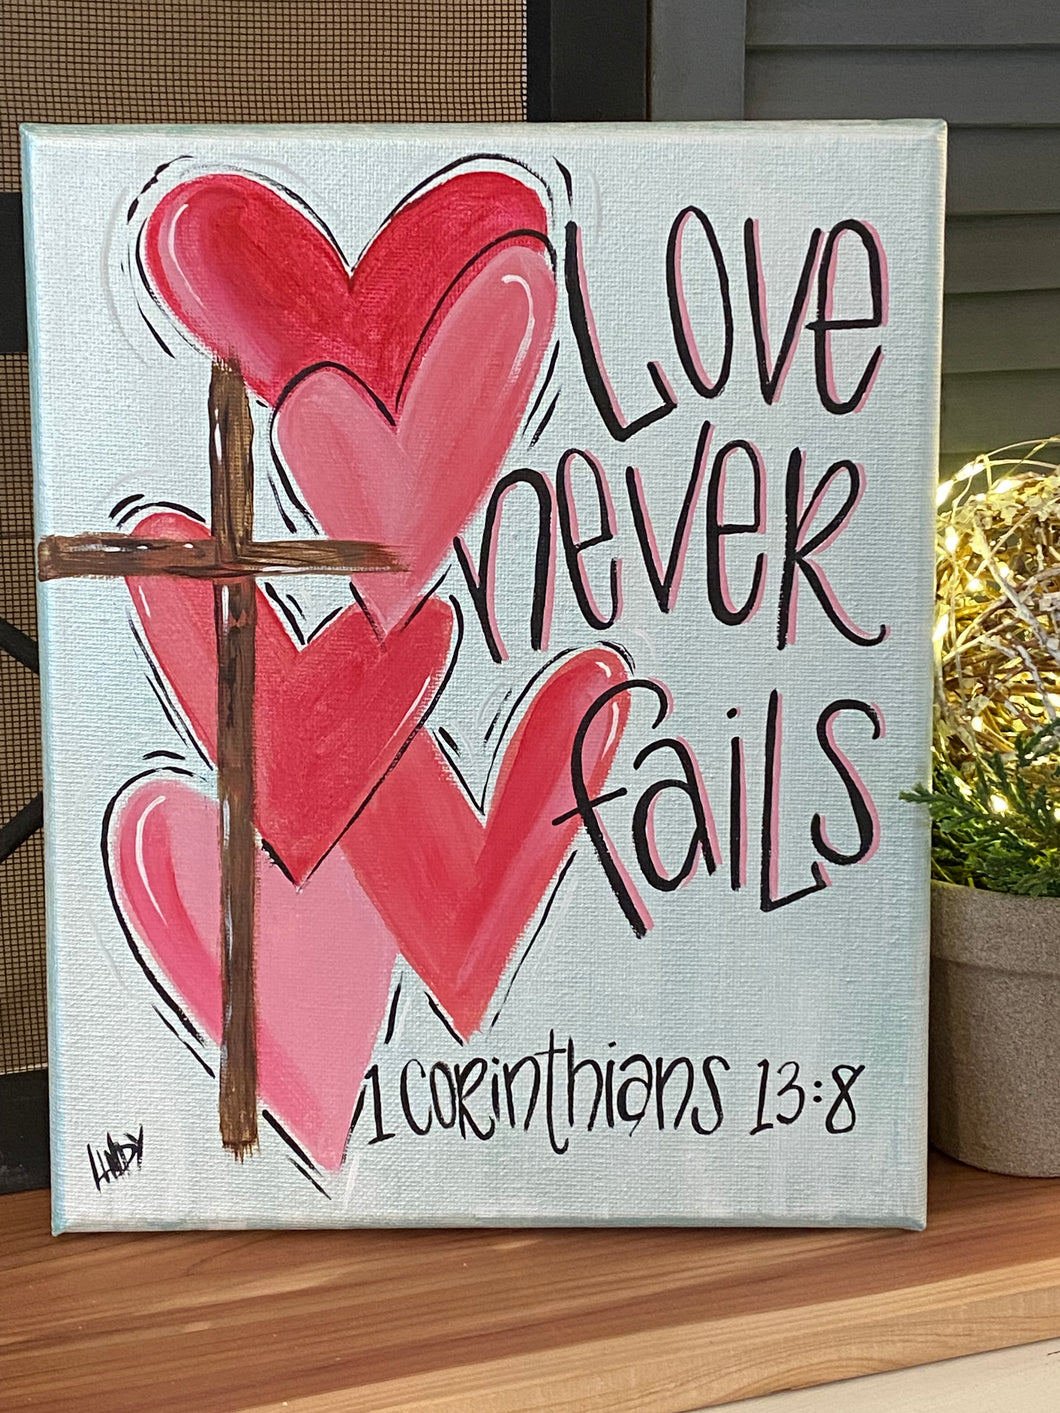 Love Never Fails Paint Party with Taterbuggin'